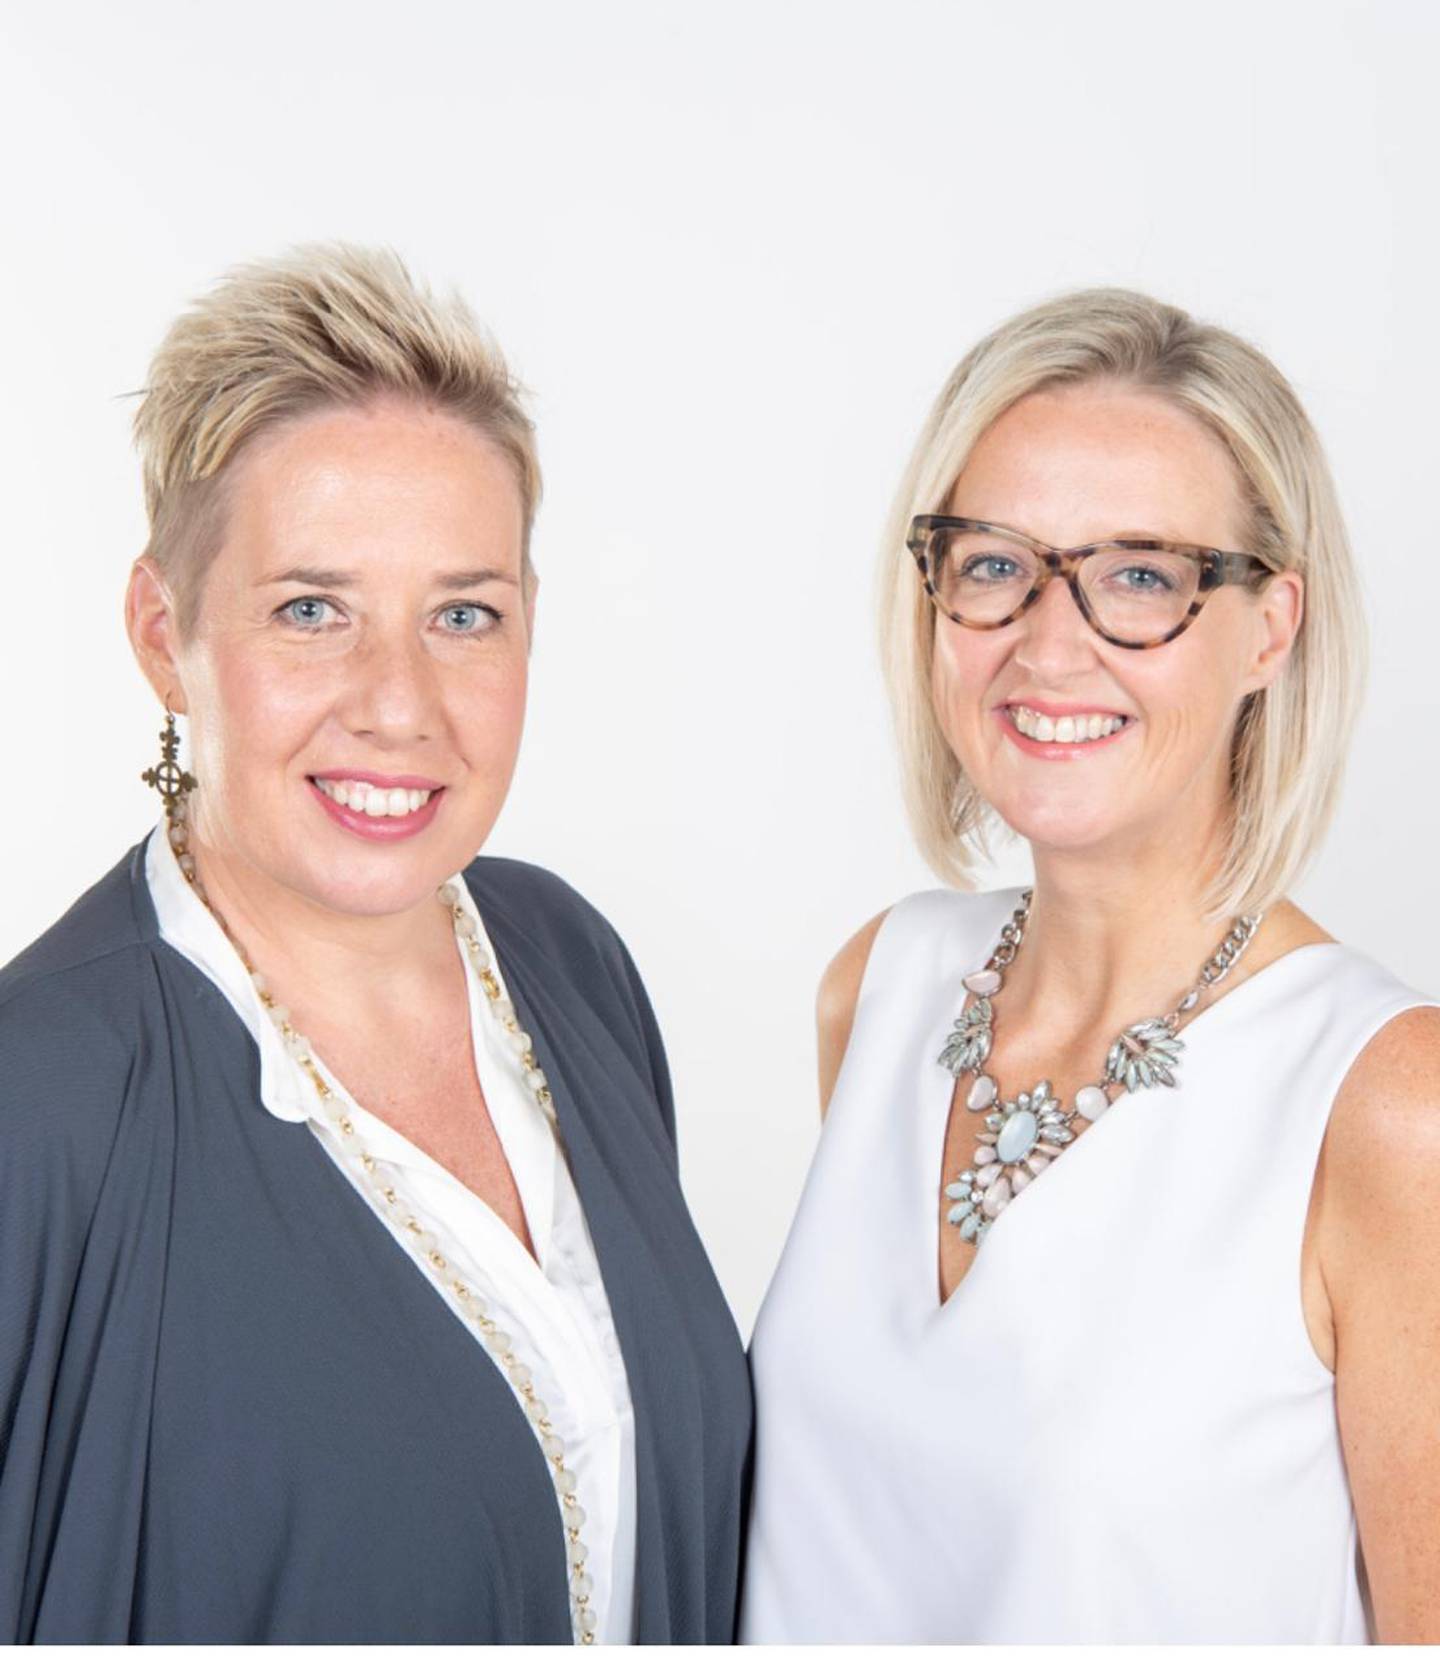 Sarah Johnson Consulting's founder, Sarah Johnson, left, and creative partner, Maxine English. The company has recently expanded its services to offer home staging